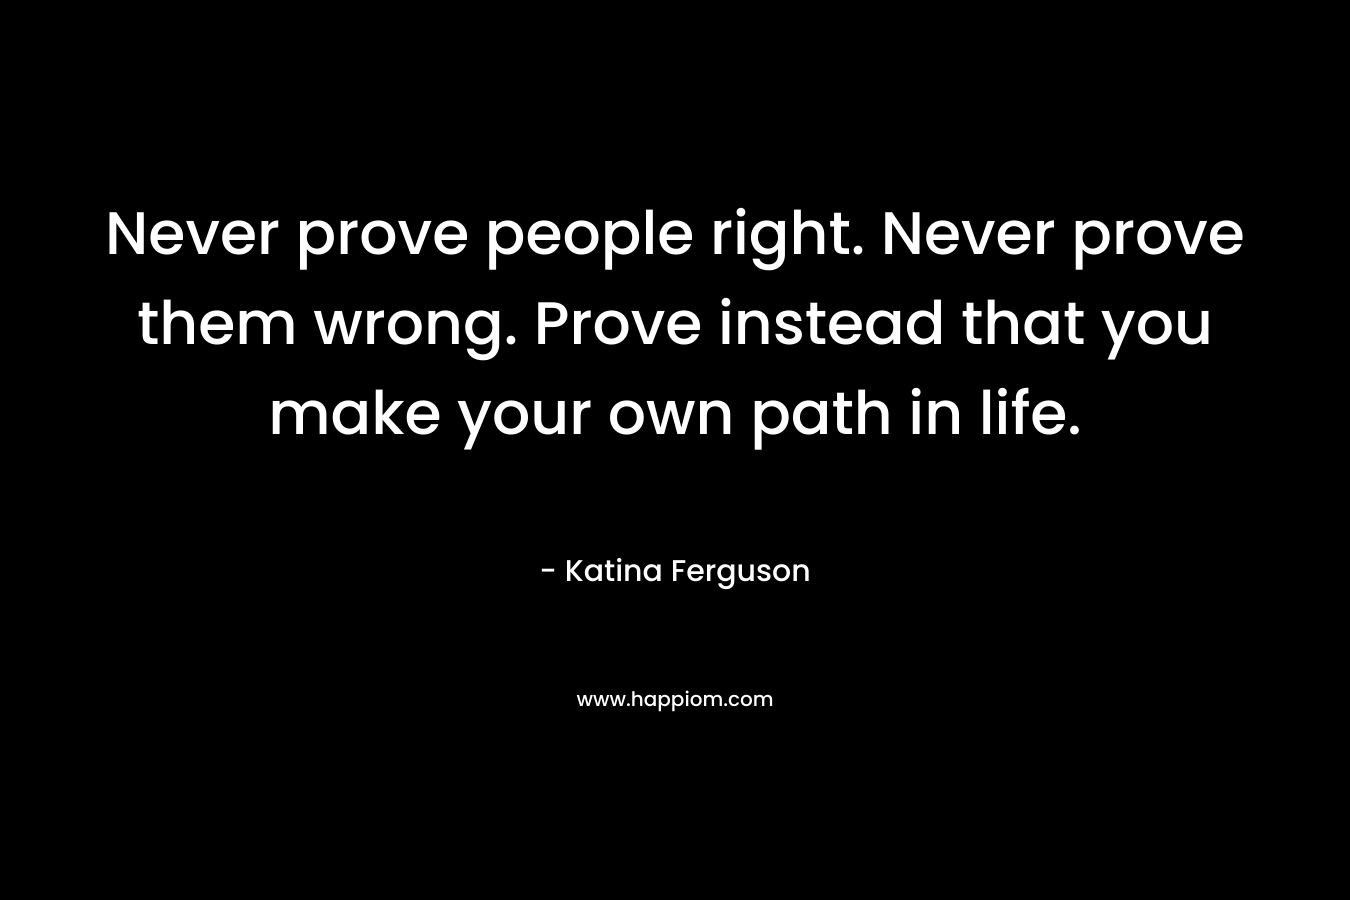 Never prove people right. Never prove them wrong. Prove instead that you make your own path in life.